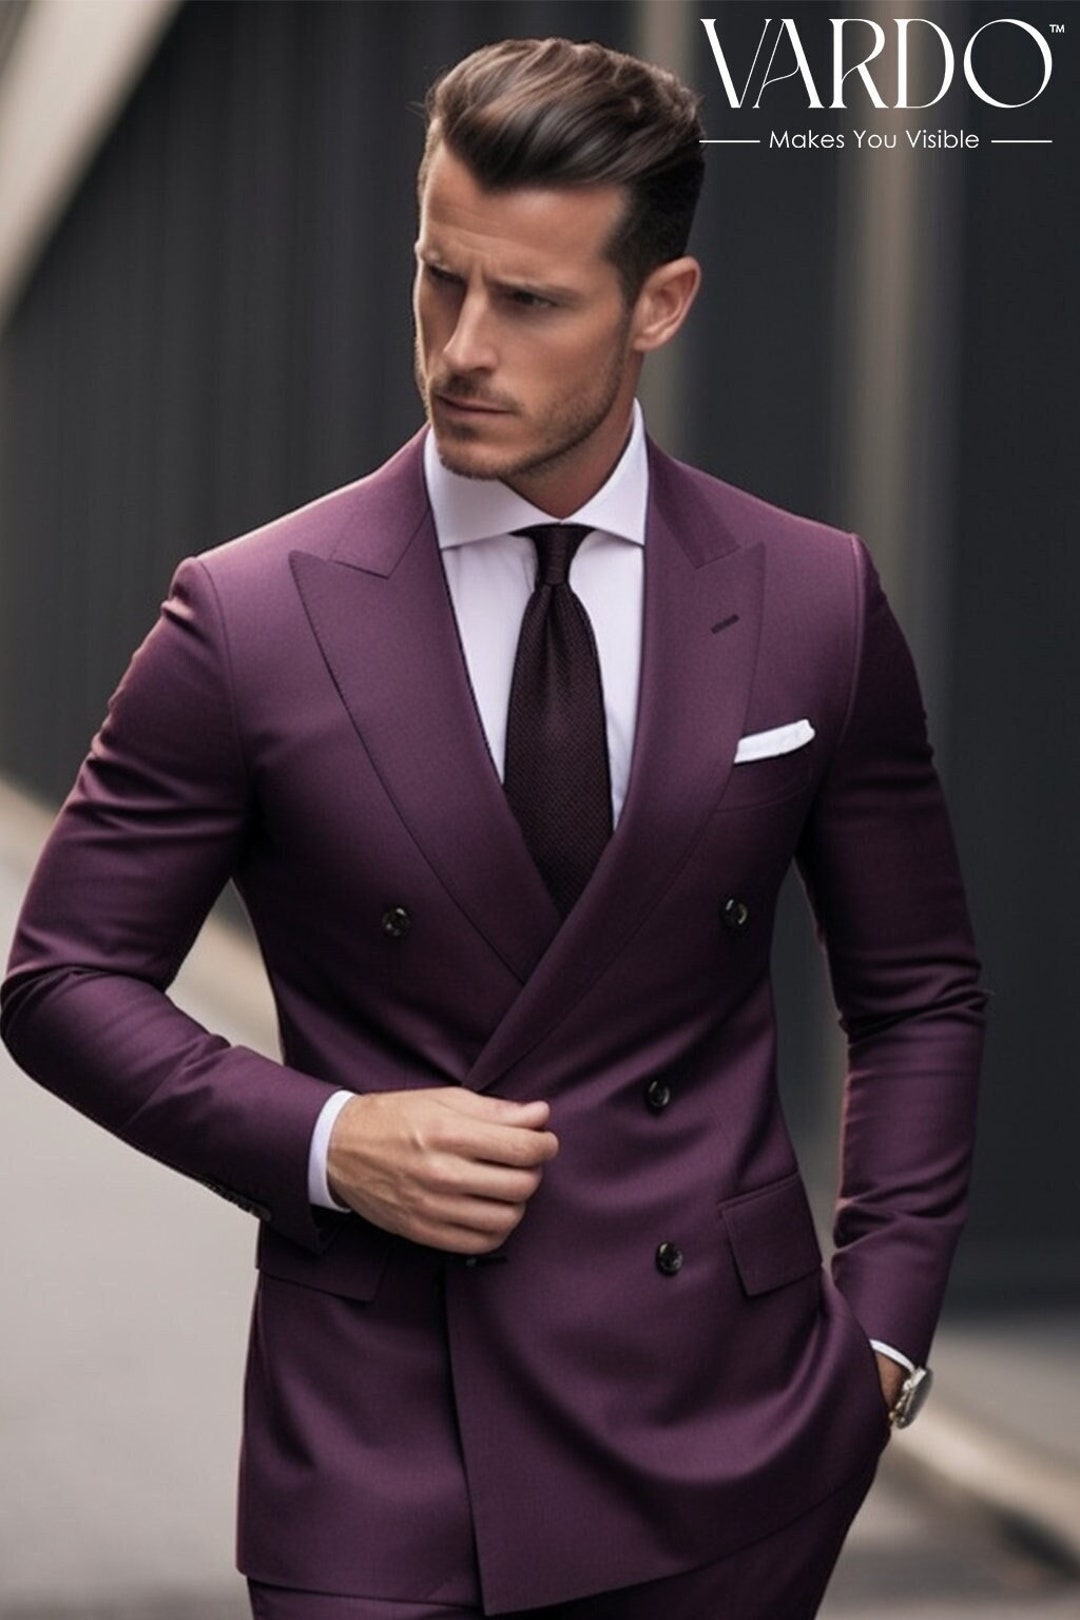 Elegant Men's Purple Double Breasted Suit Classic Style - Etsy